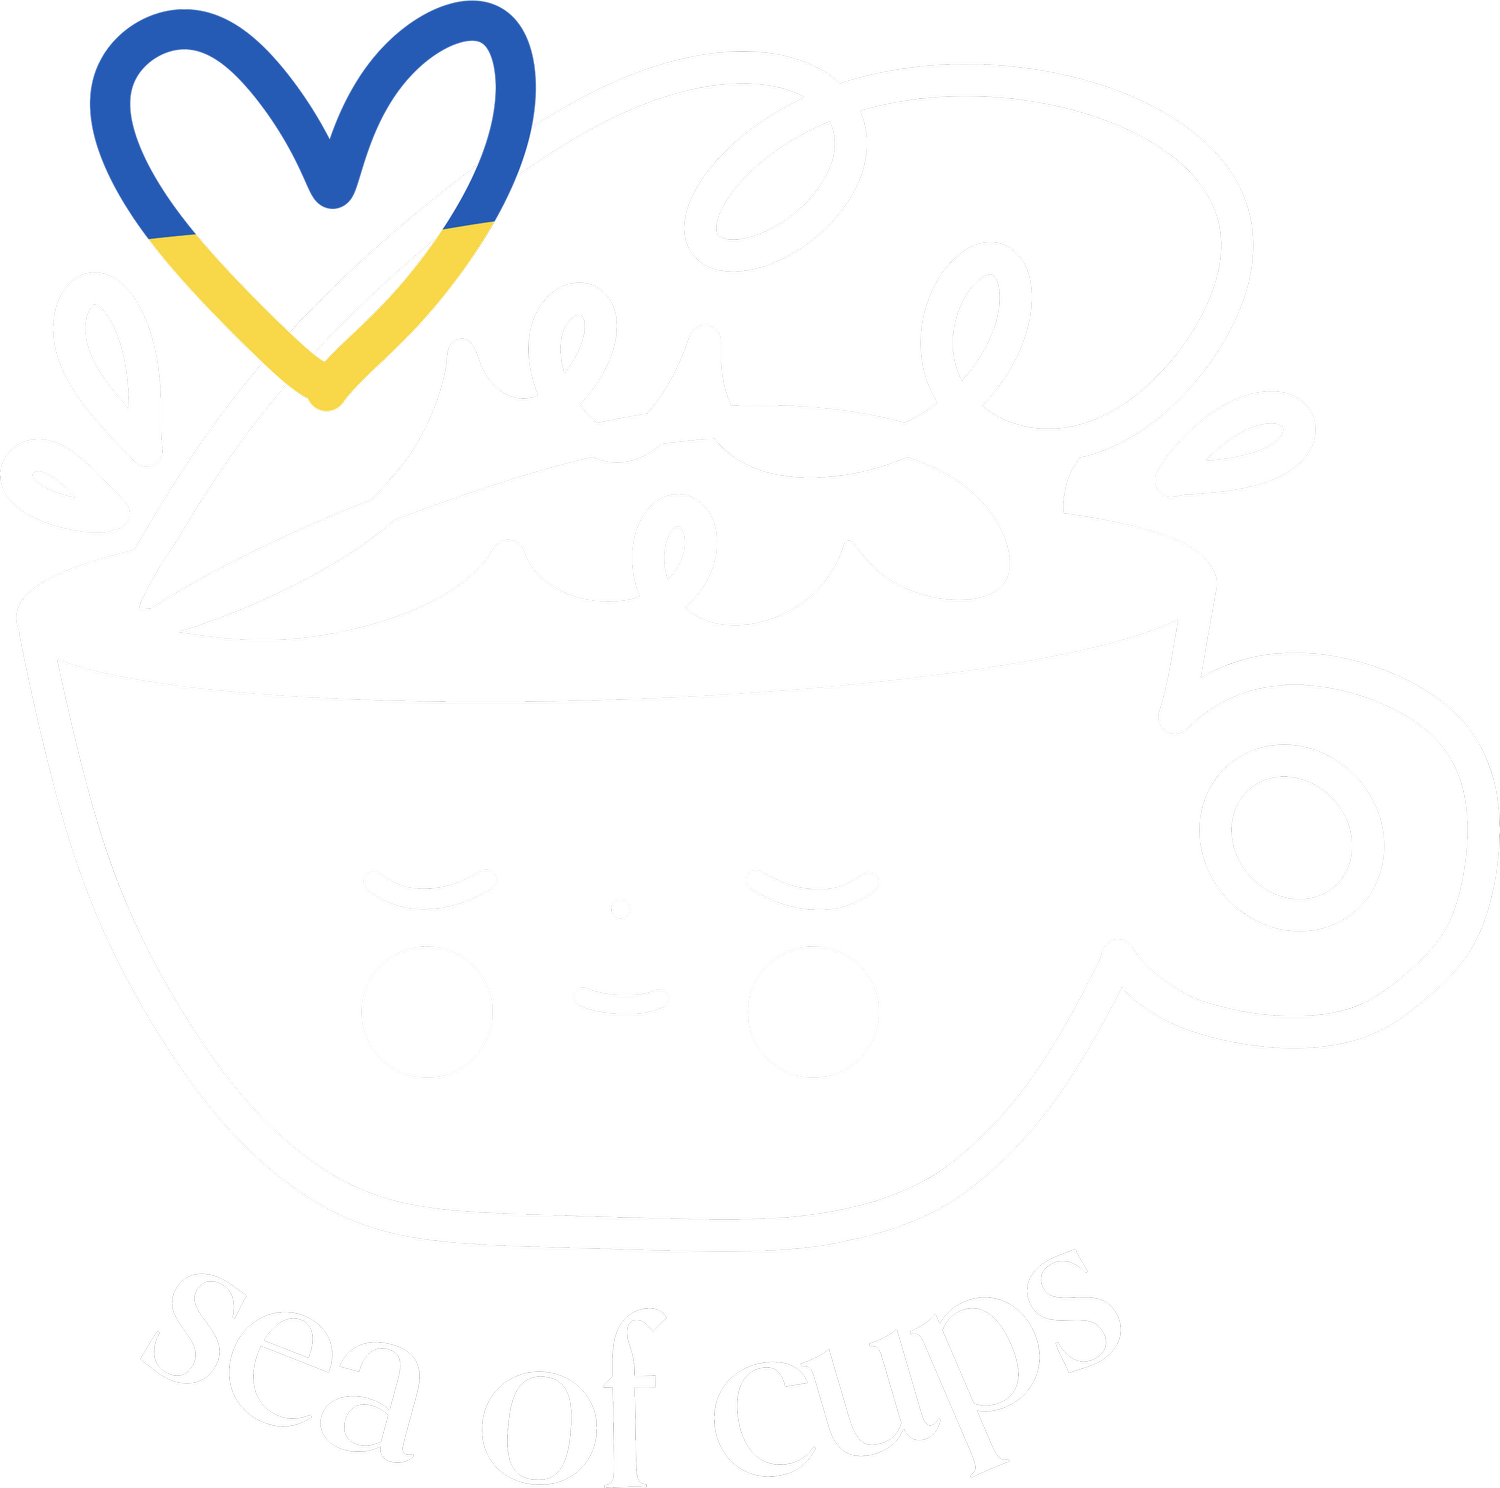 Sea of Cups